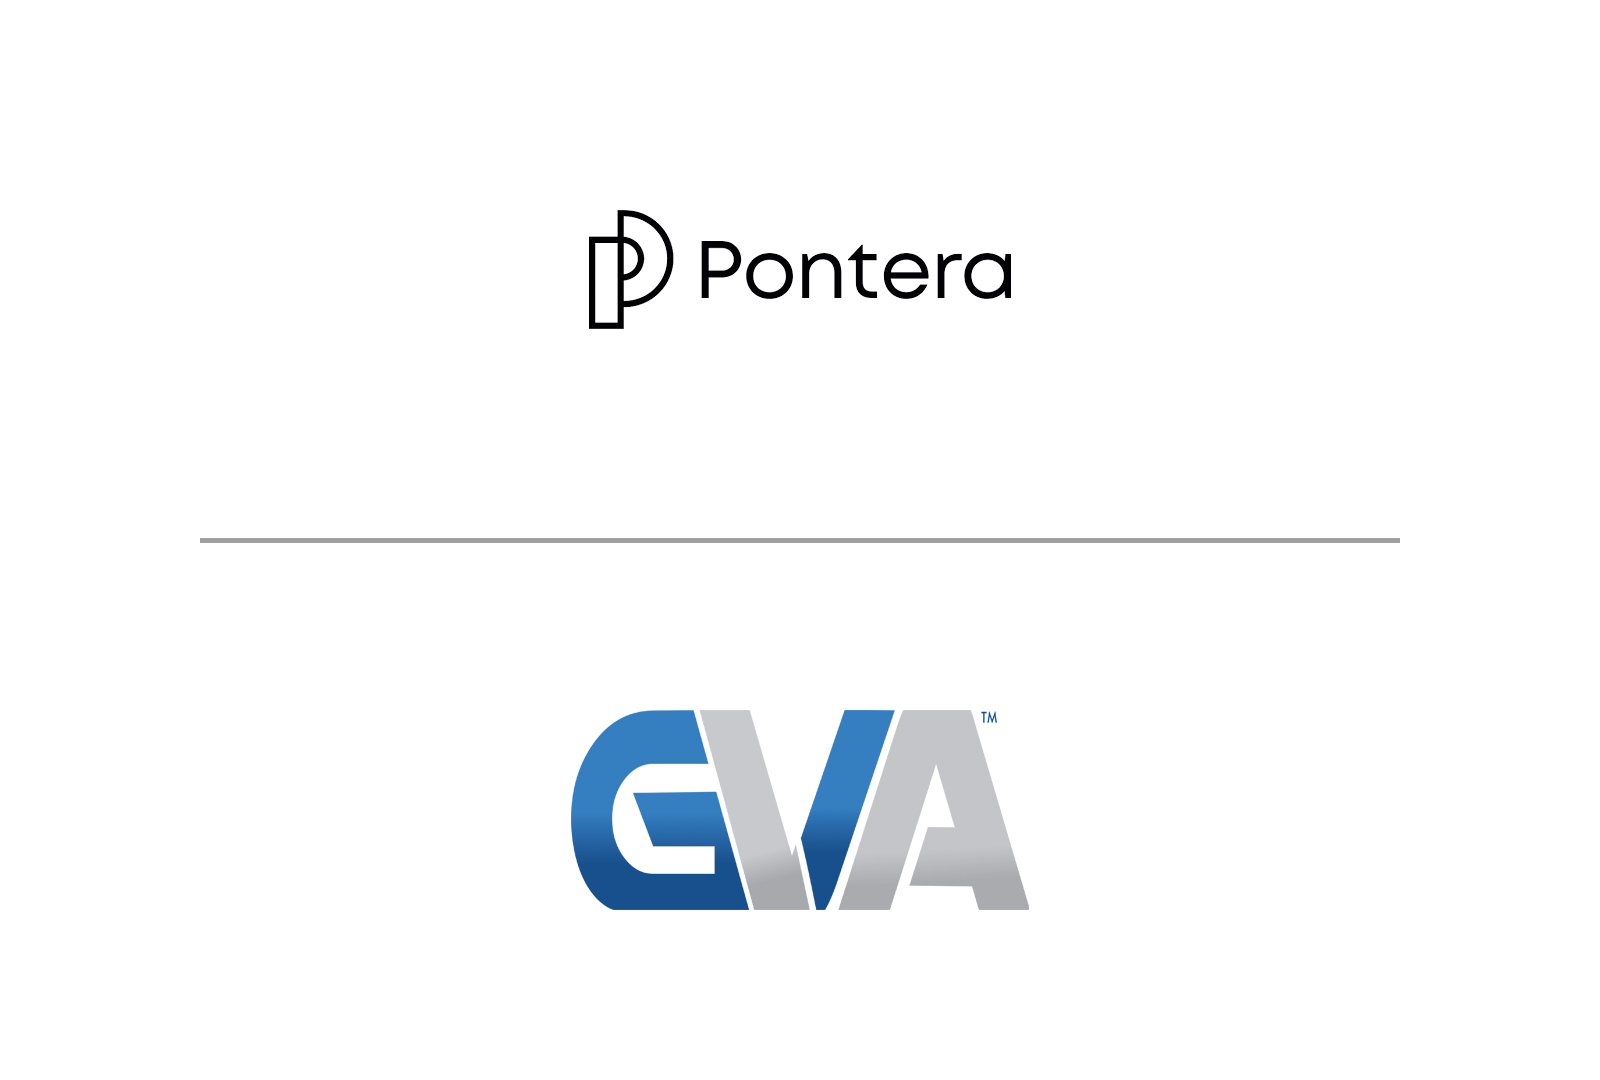 GVA Selects Pontera to Provide Tailored Retirement Solutions to Advisors